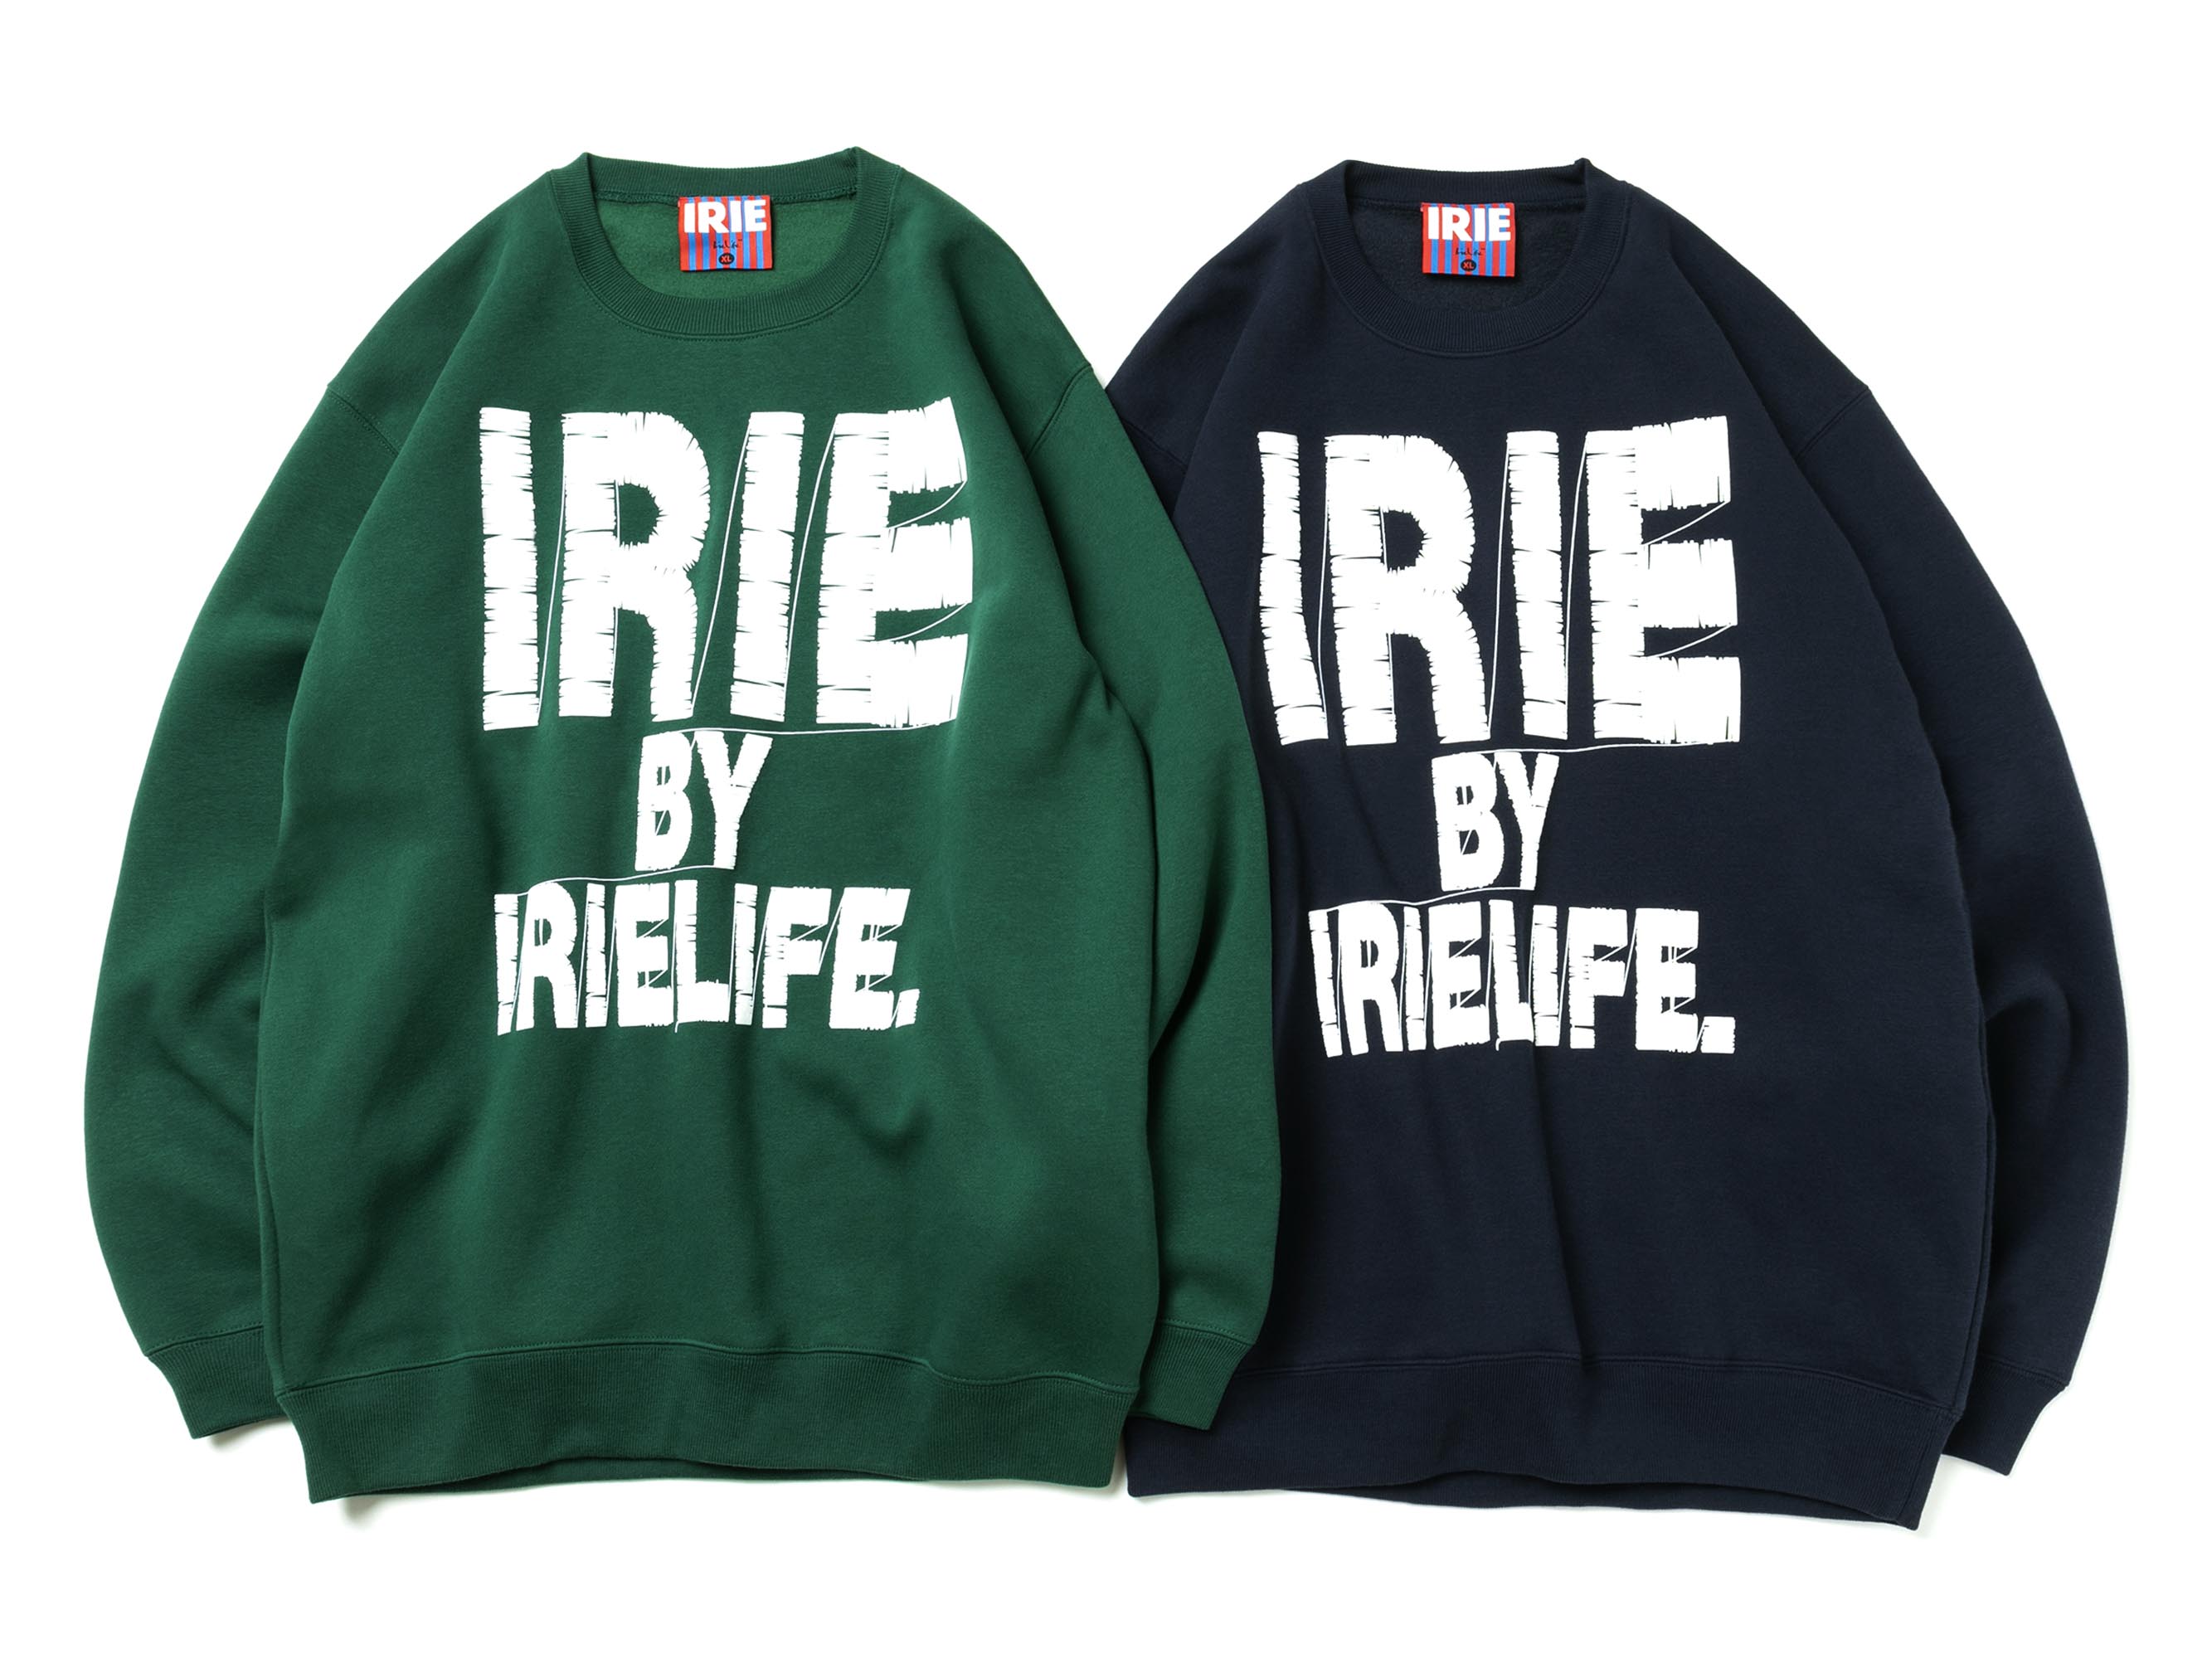 EMBROIDERY PRINT CREW - IRIE by irielife